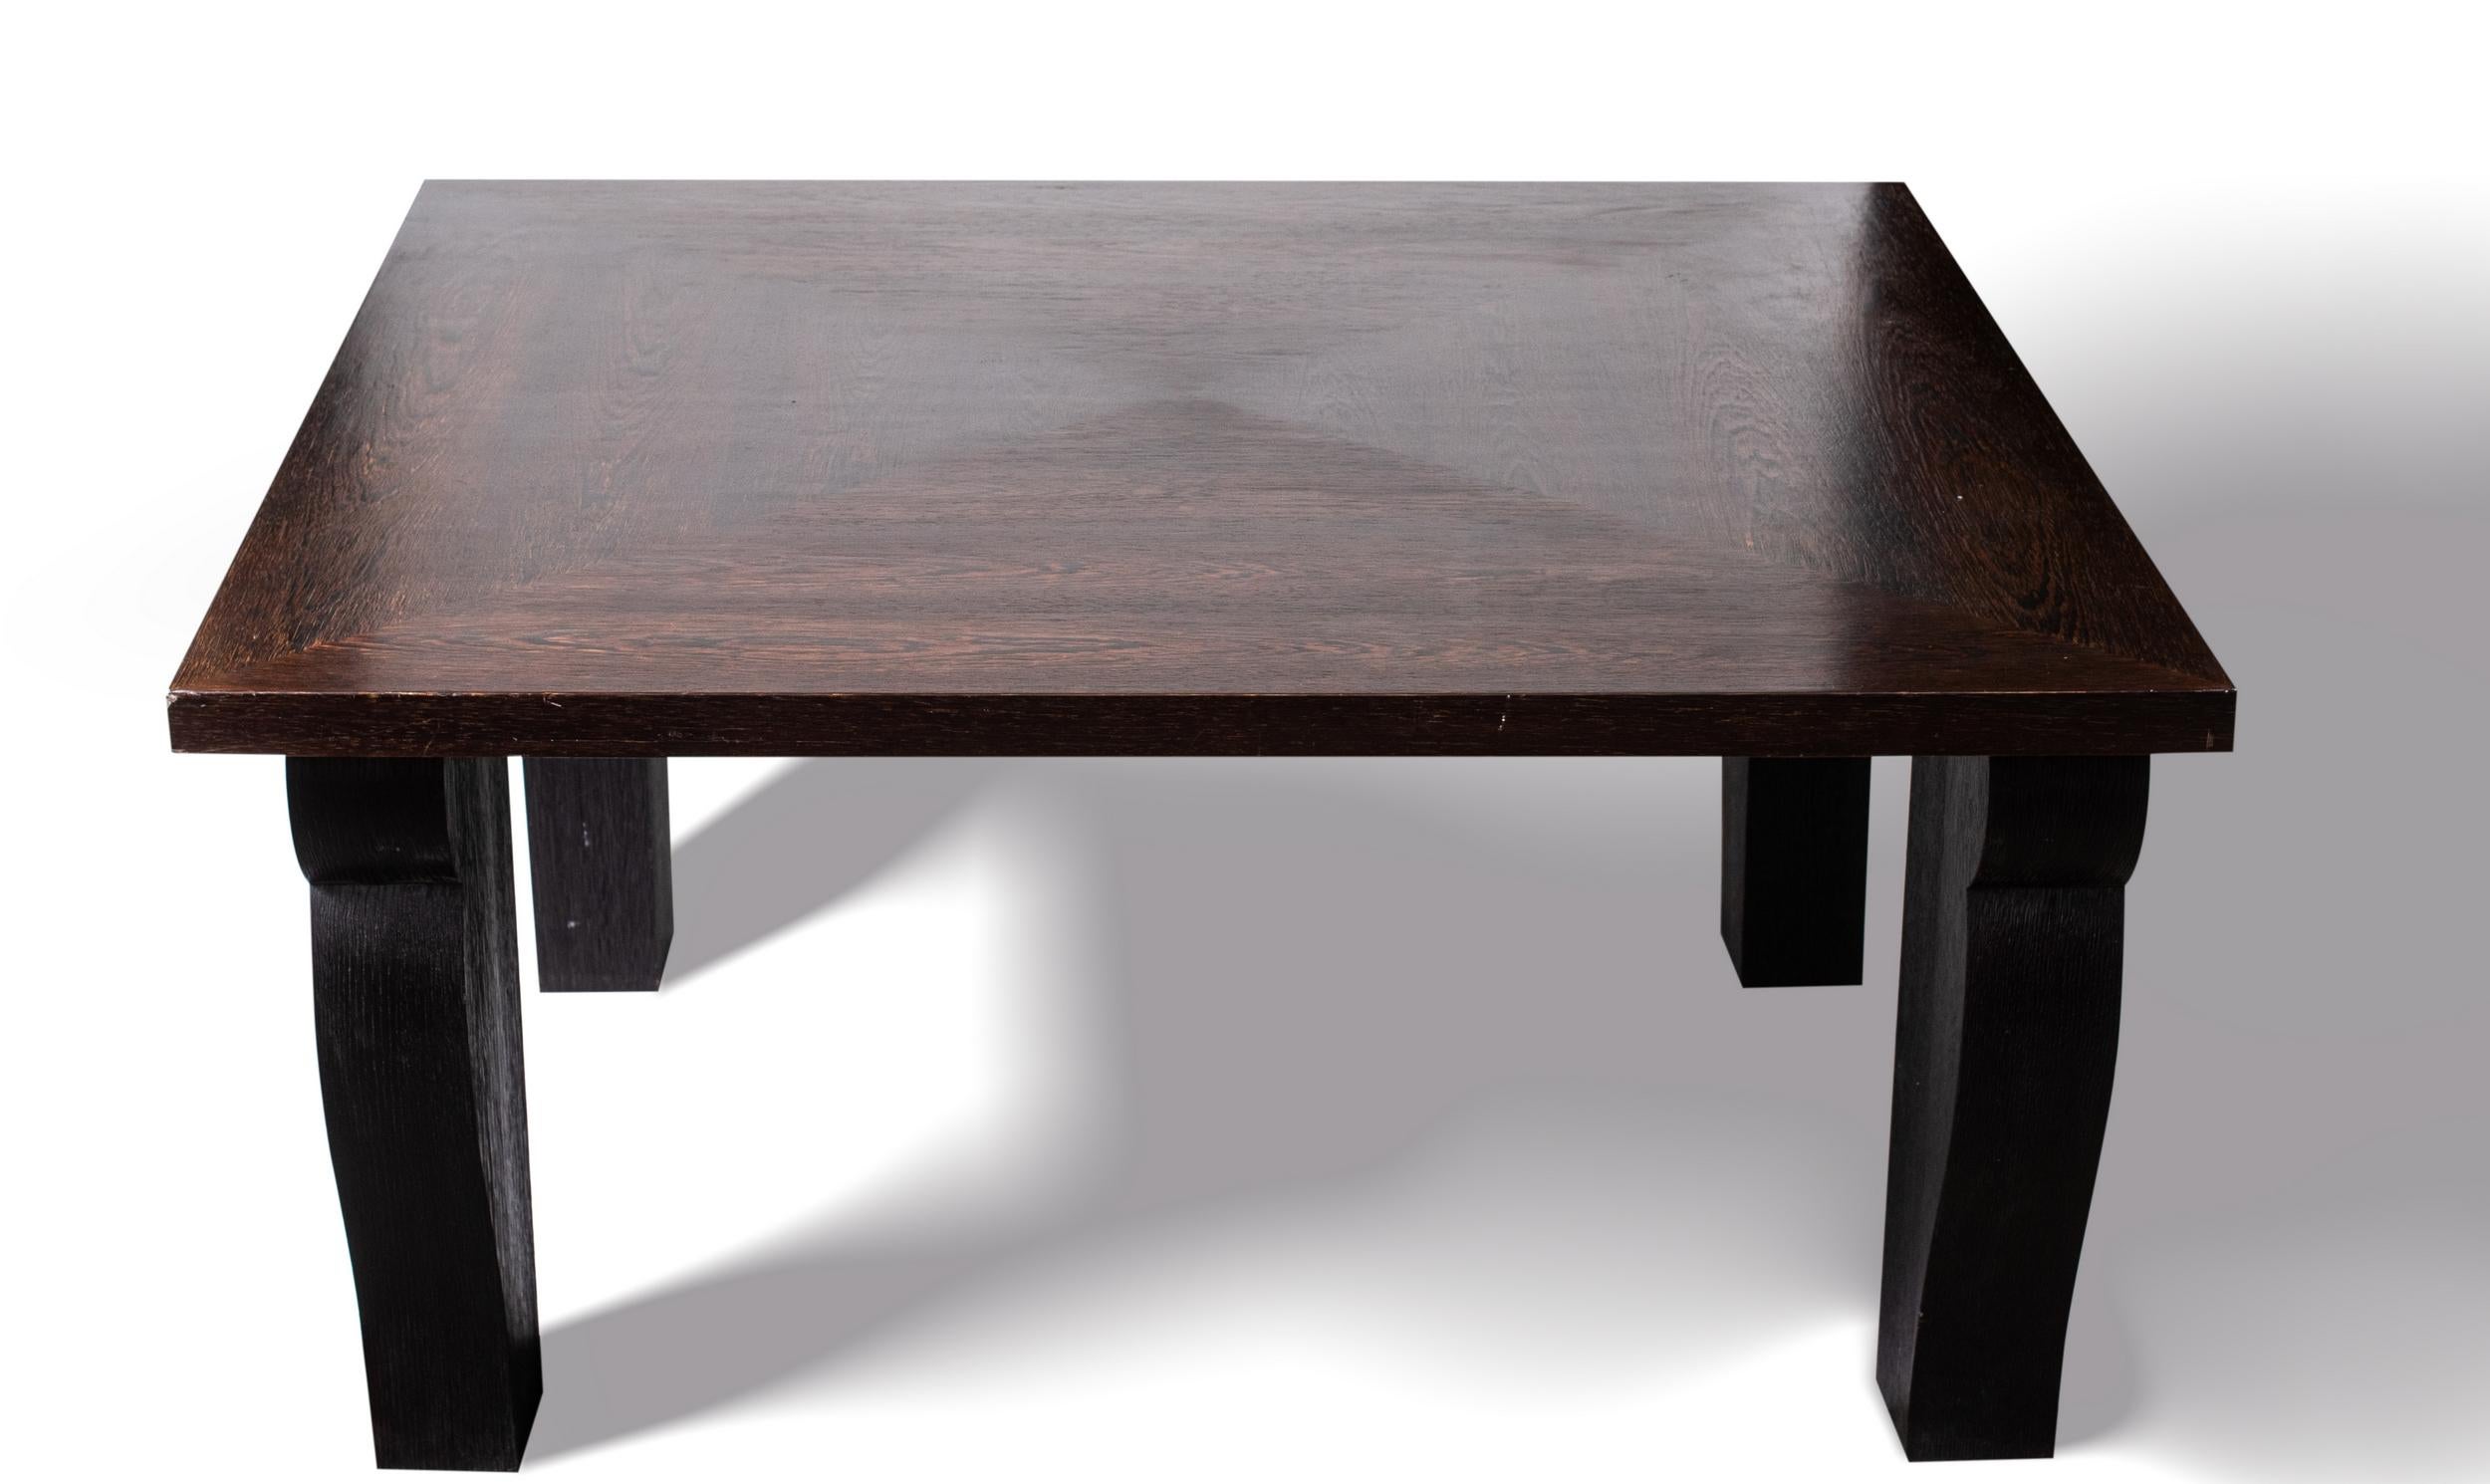 Dining room table designed by Jean-Michel Frank and Adolphe Chanaux in 1935. Stained oak and “sun” wenge veneer. Reedited by Ecart International.

Width: 150 cm (59 inches)
Depth: 150 cm (59 inches)
Tray thickness: 5 cm (2 inches)
Height: 74 cm